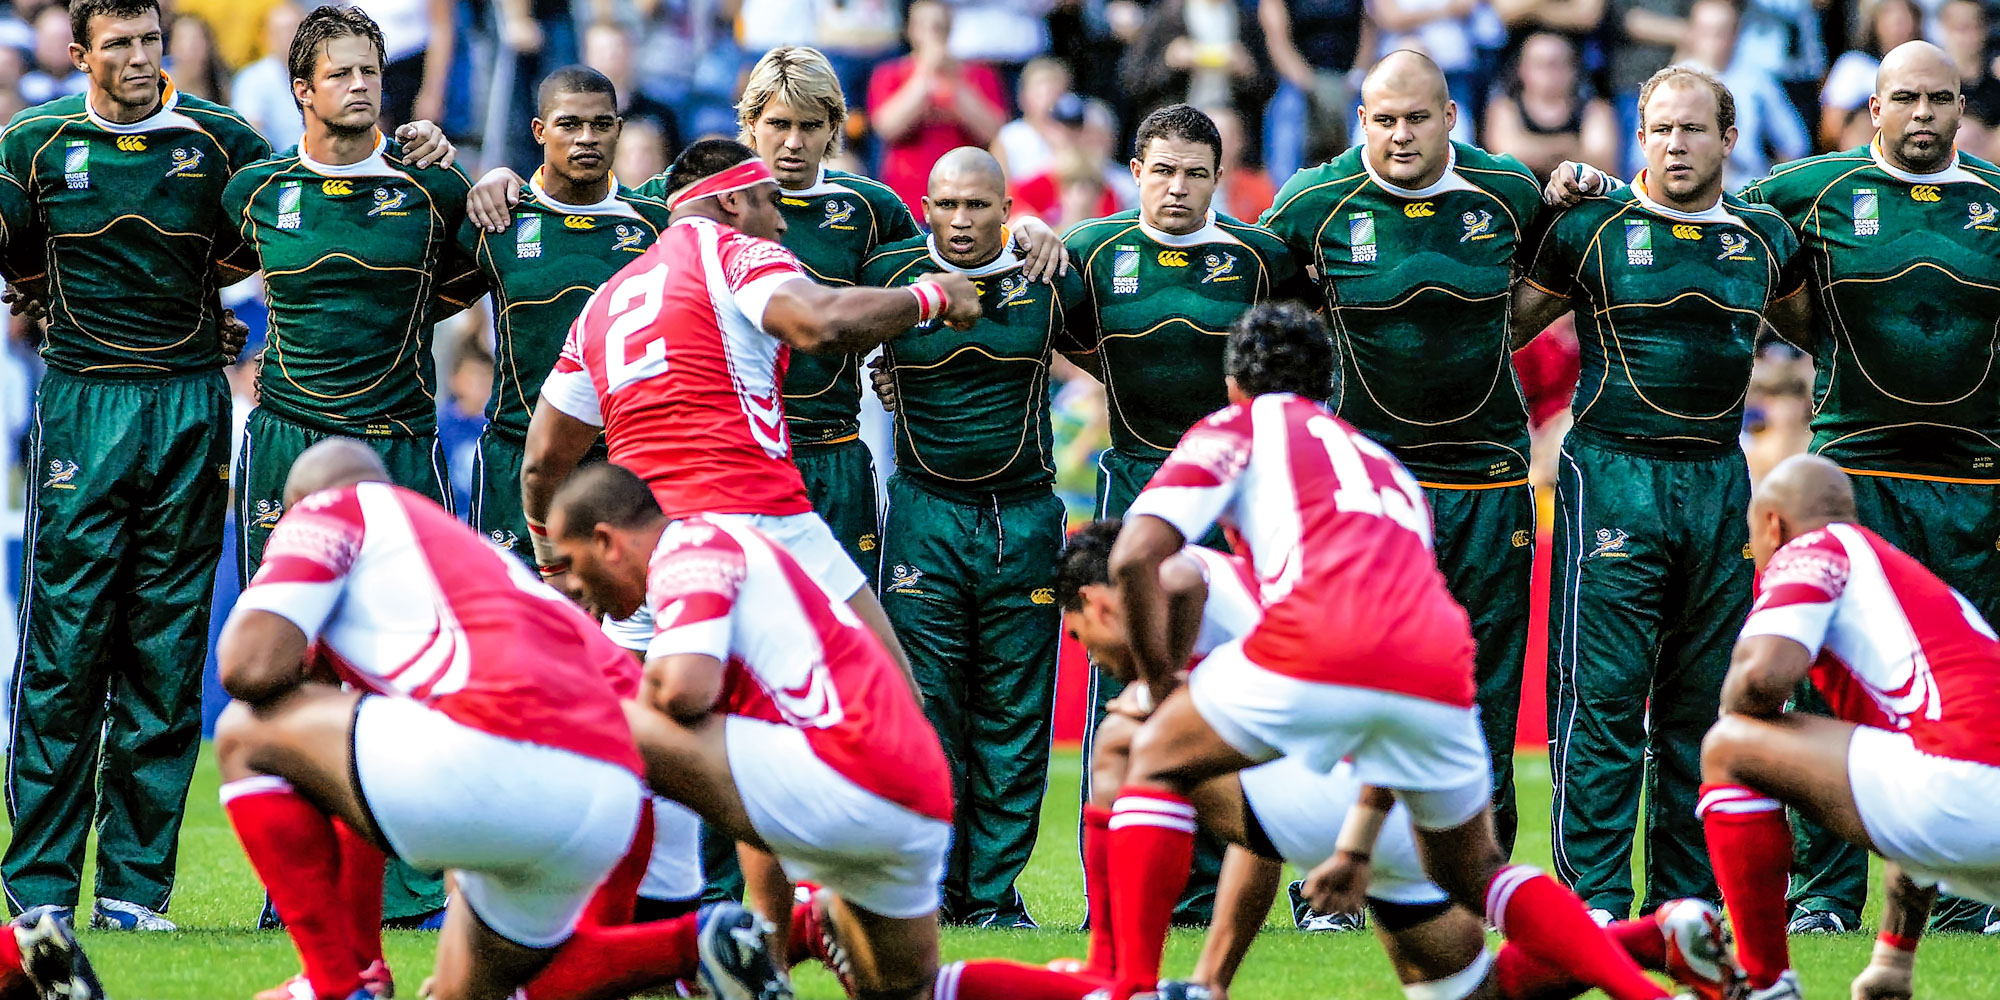 The Springboks face Tonga during the 2007 Rugby World Cup in France.